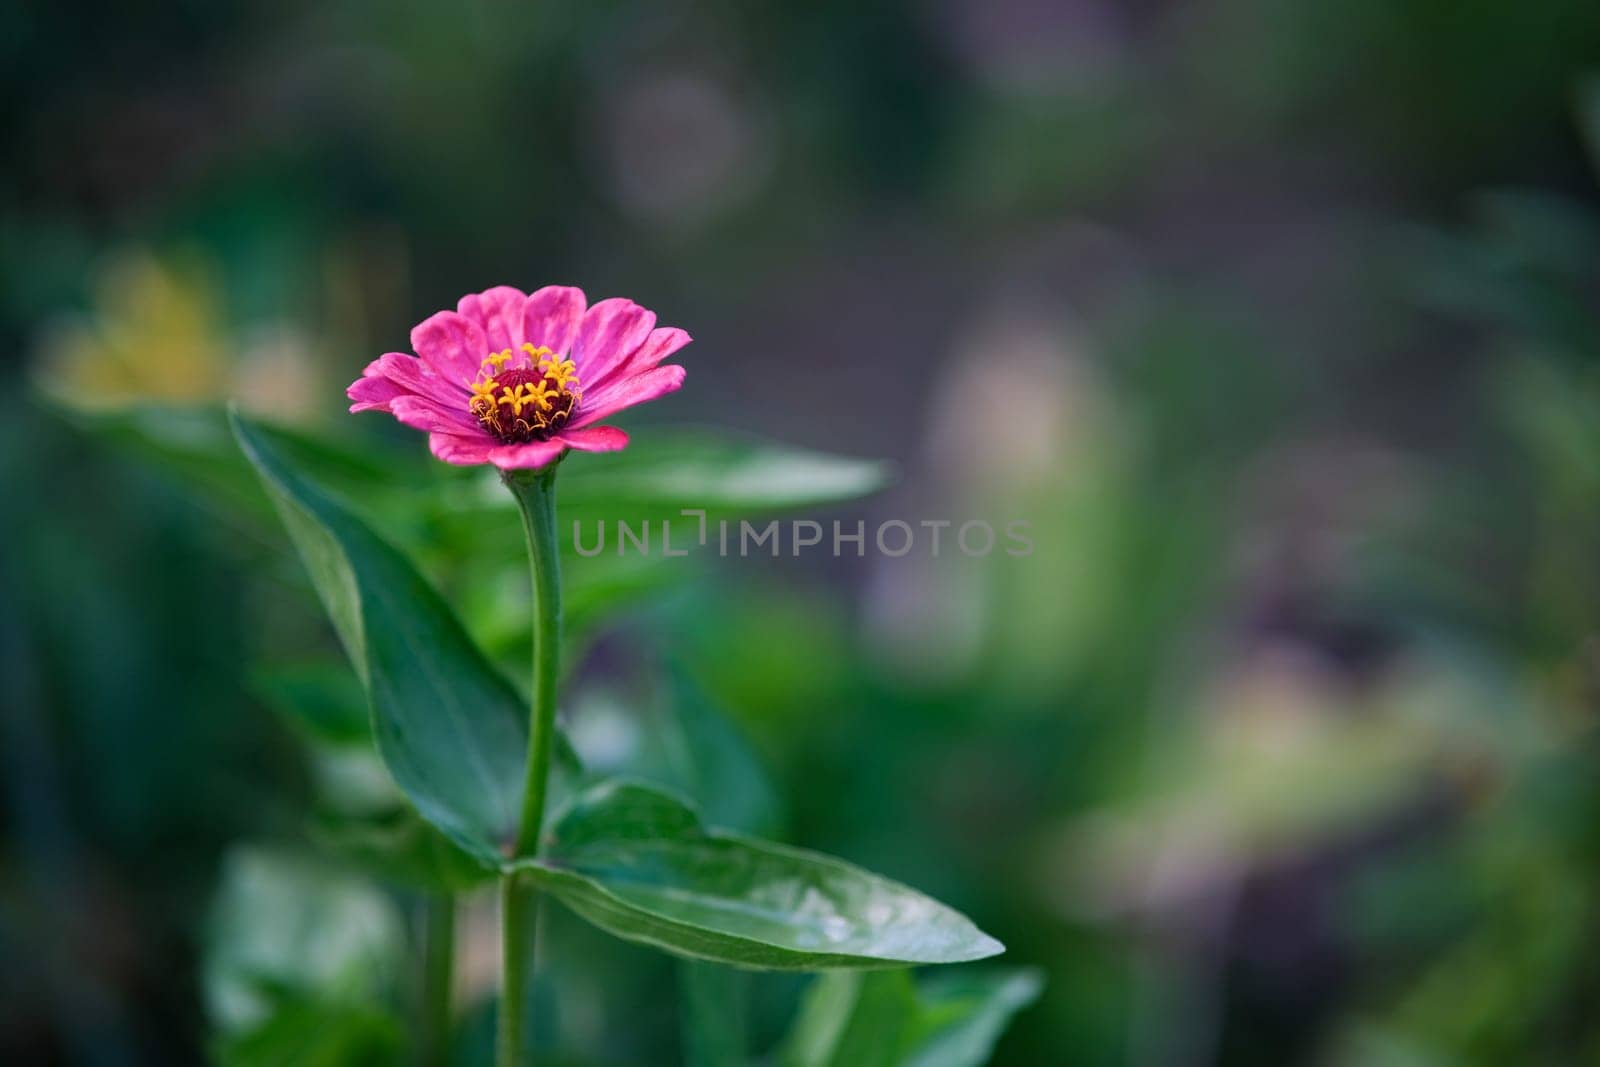 Nogodok in the garden. A lone pink flower with a yellow center in a garden. Flower on a green background.